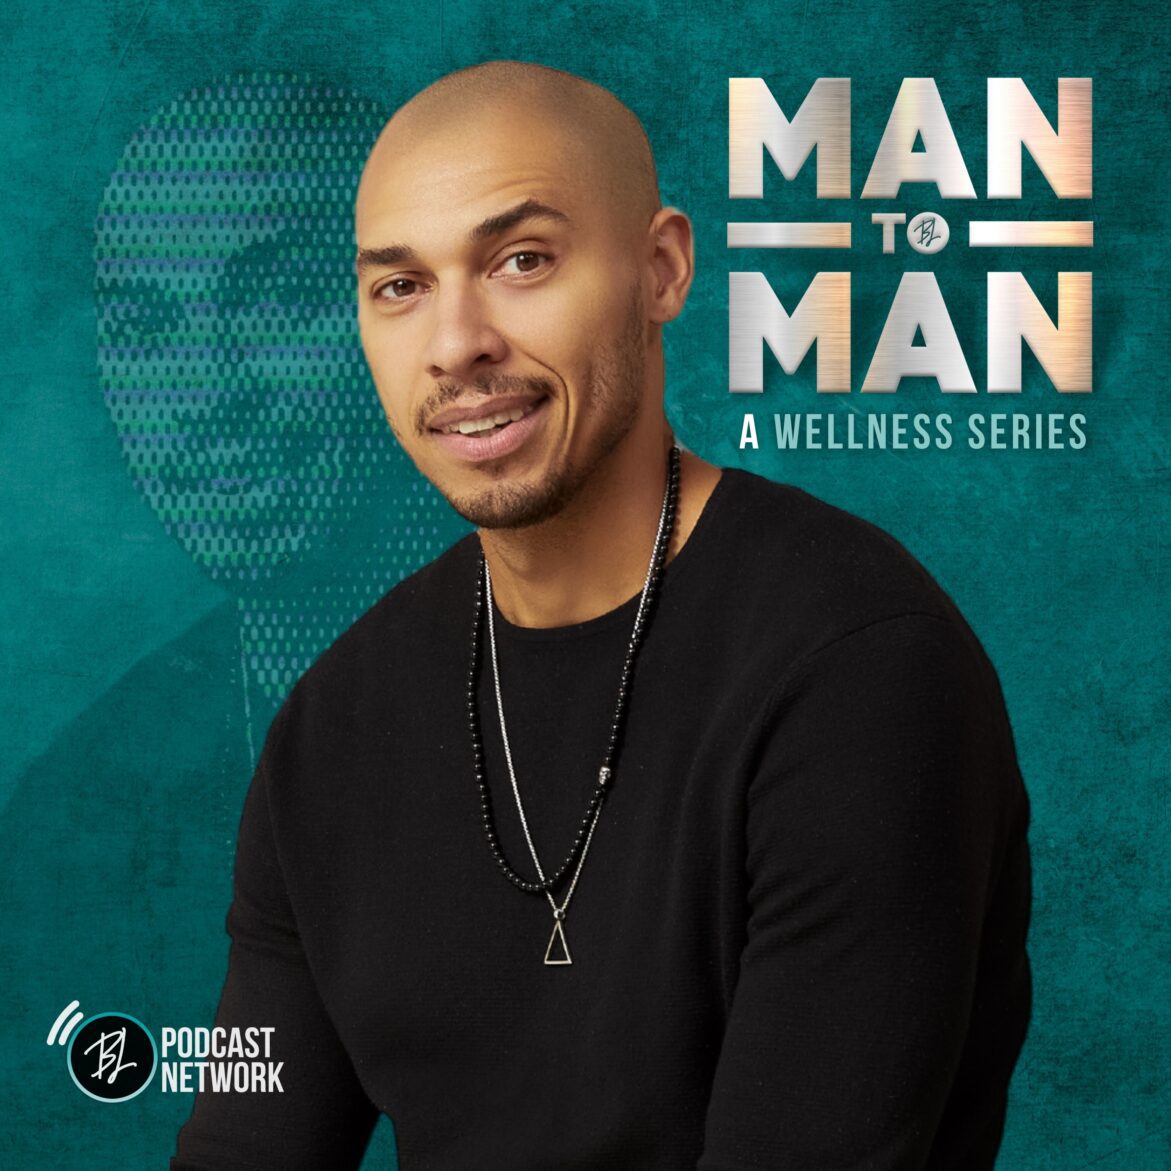 Black Podcasting - Man to Man with Hosea Chanchez